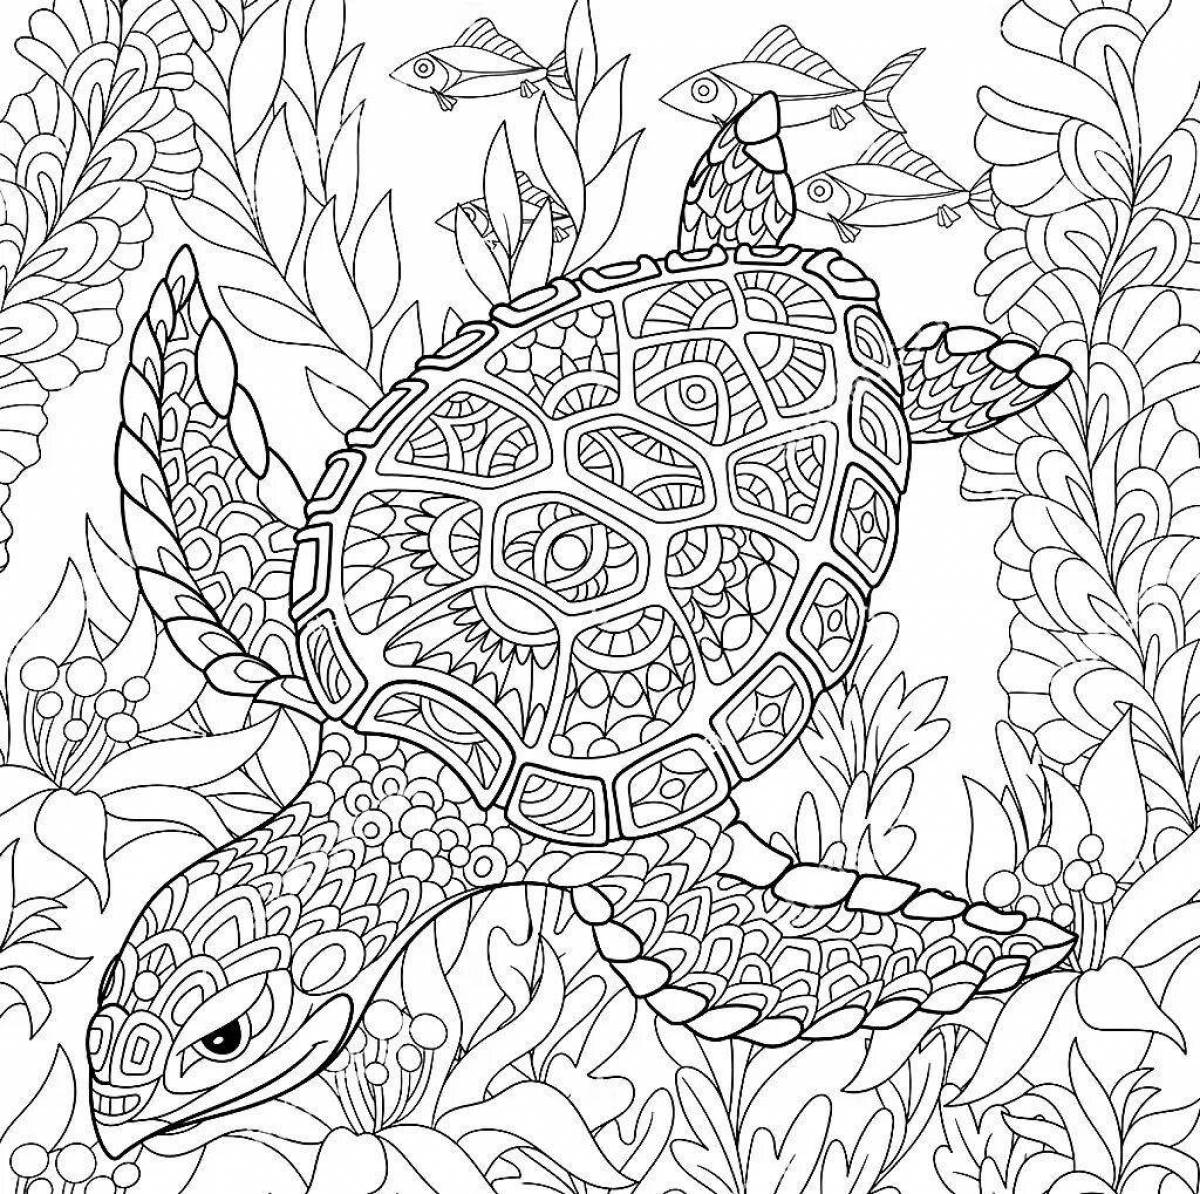 Relaxing anti-stress turtle coloring book